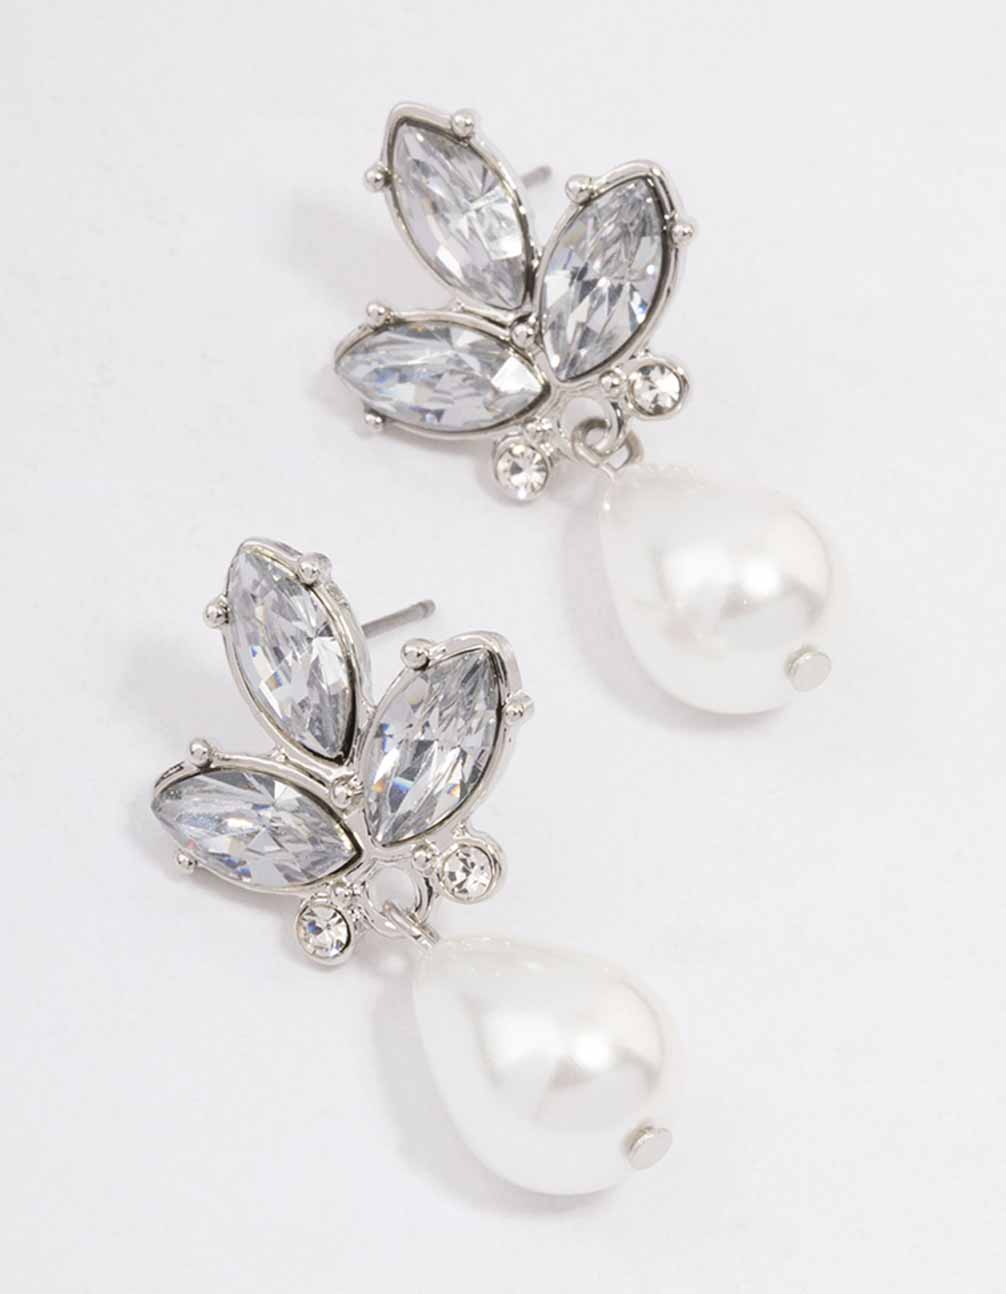 Linyer 3 Pieces Pearl Brooch Pins Pearl Pins Brooch Set Jewelry Accessories White, Women's, Silver